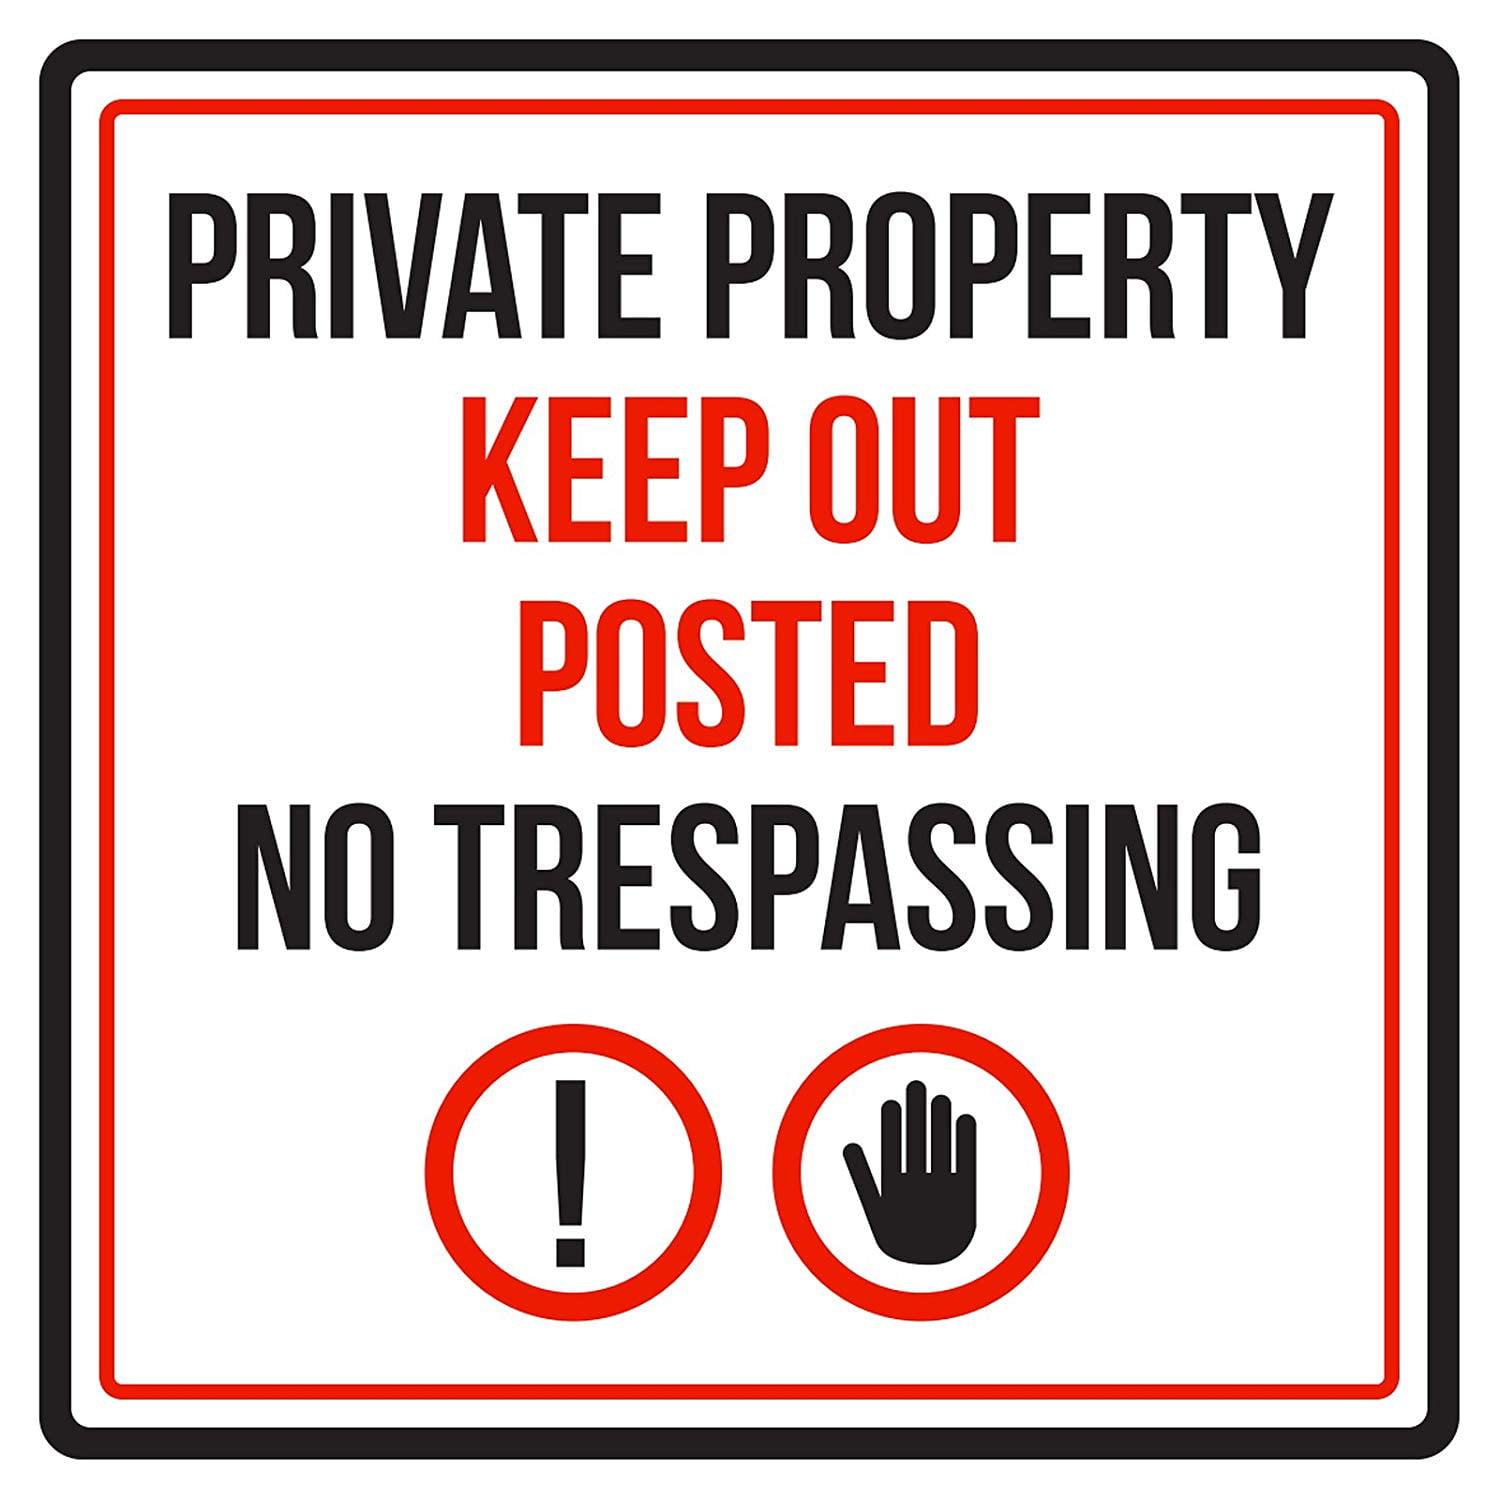 Private Property Keep Out Posted No Trespassing Business